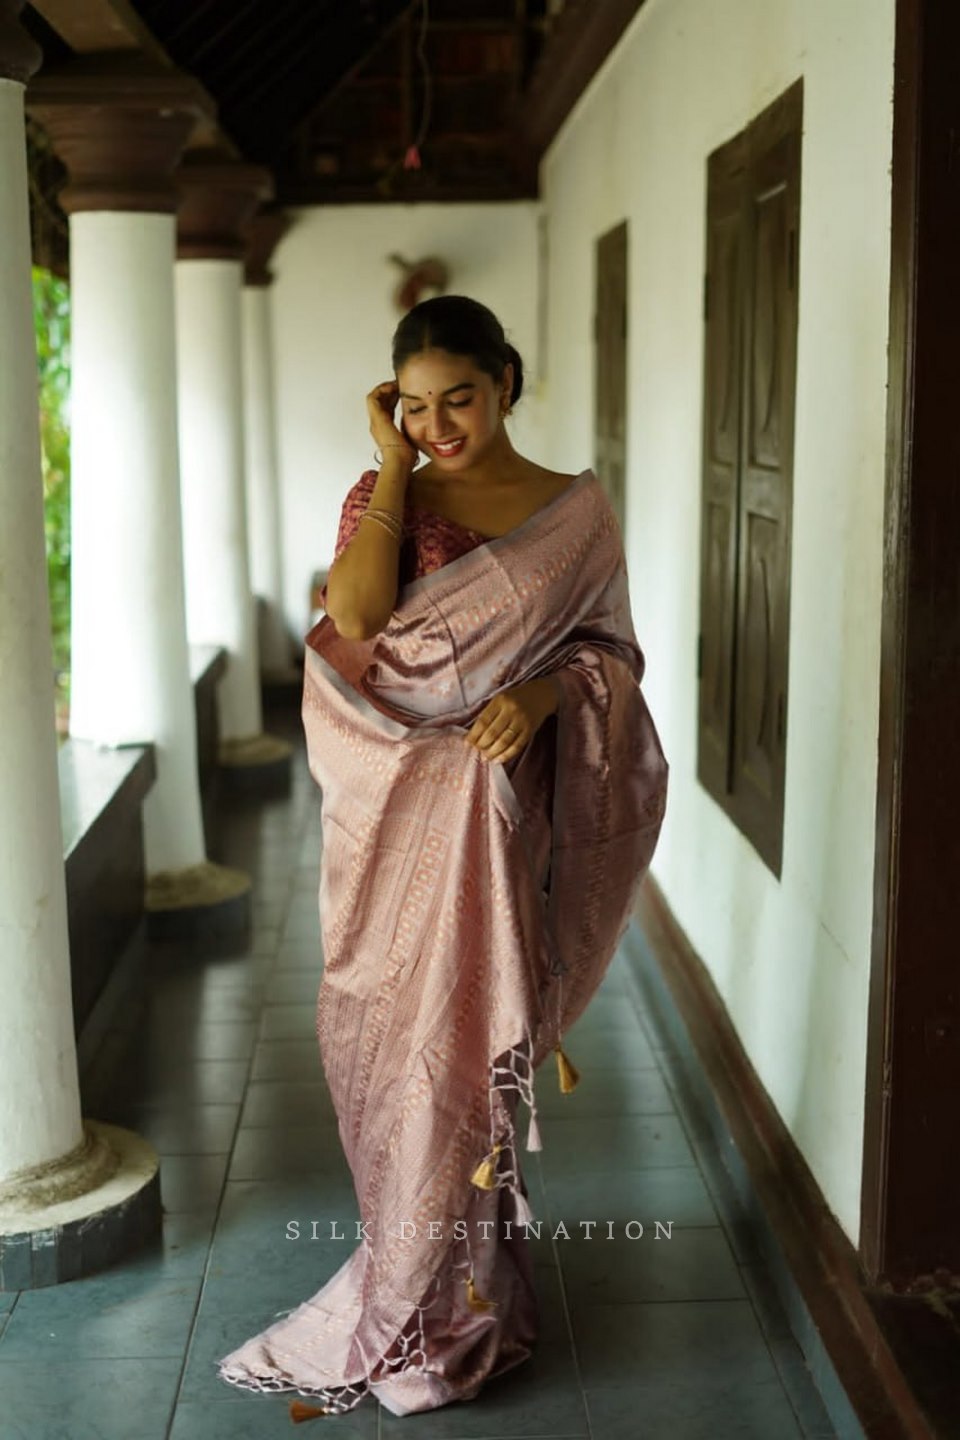 Taupe Tranquility: Taupe Gray Saree Featuring a Chocolate Brown Border and Intricate Design